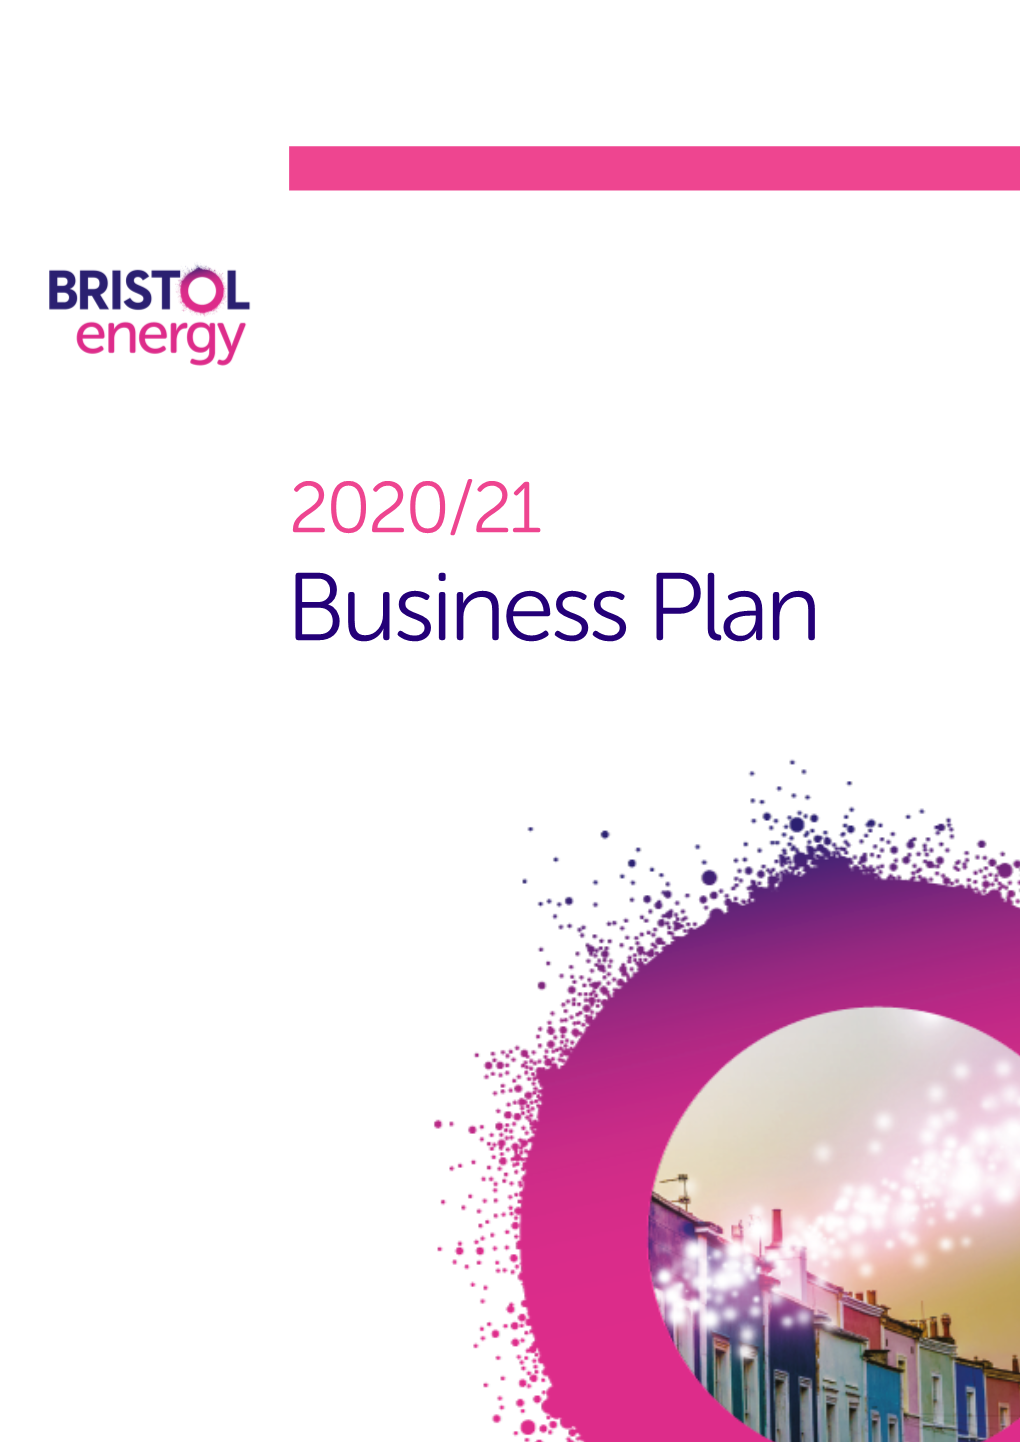 2020/21 Business Plan Welcome